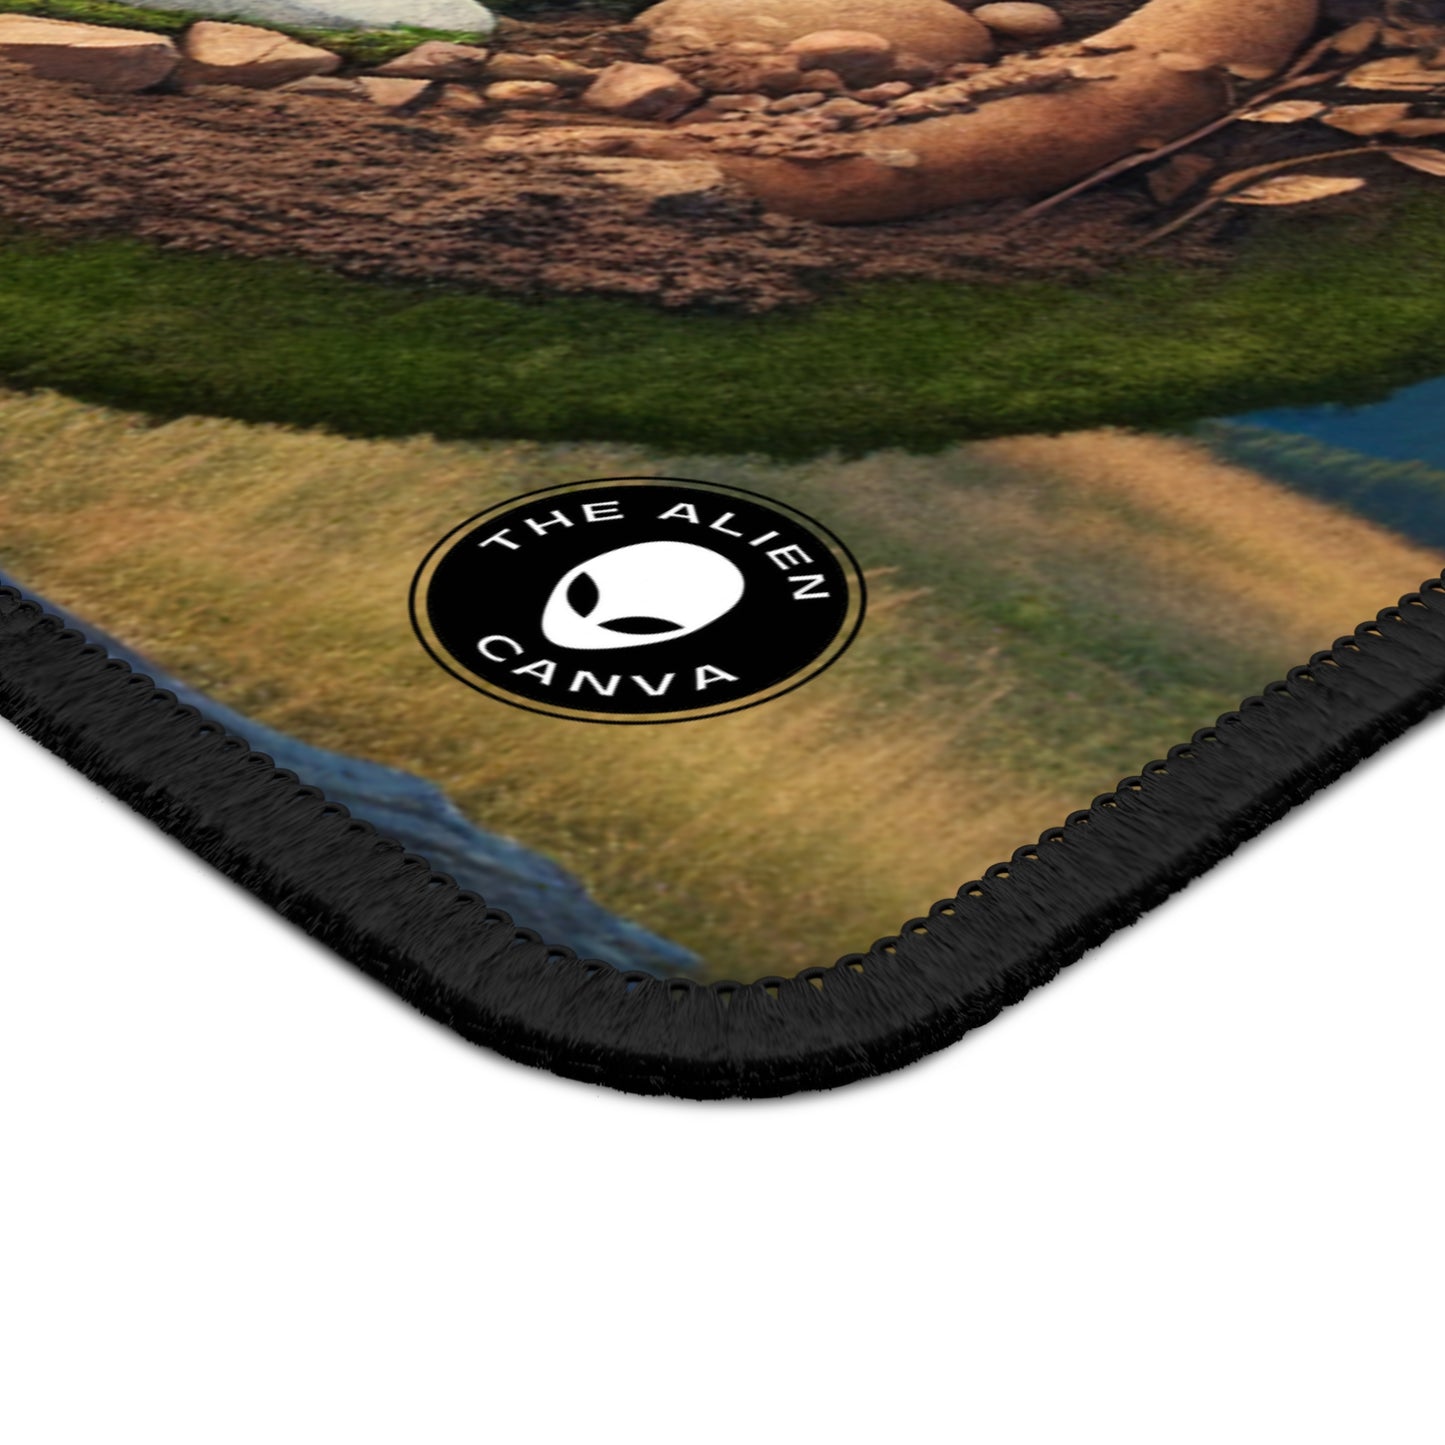 "Sahara Sands: Aerial Earth Art Installation" - The Alien Gaming Mouse Pad Earth Art